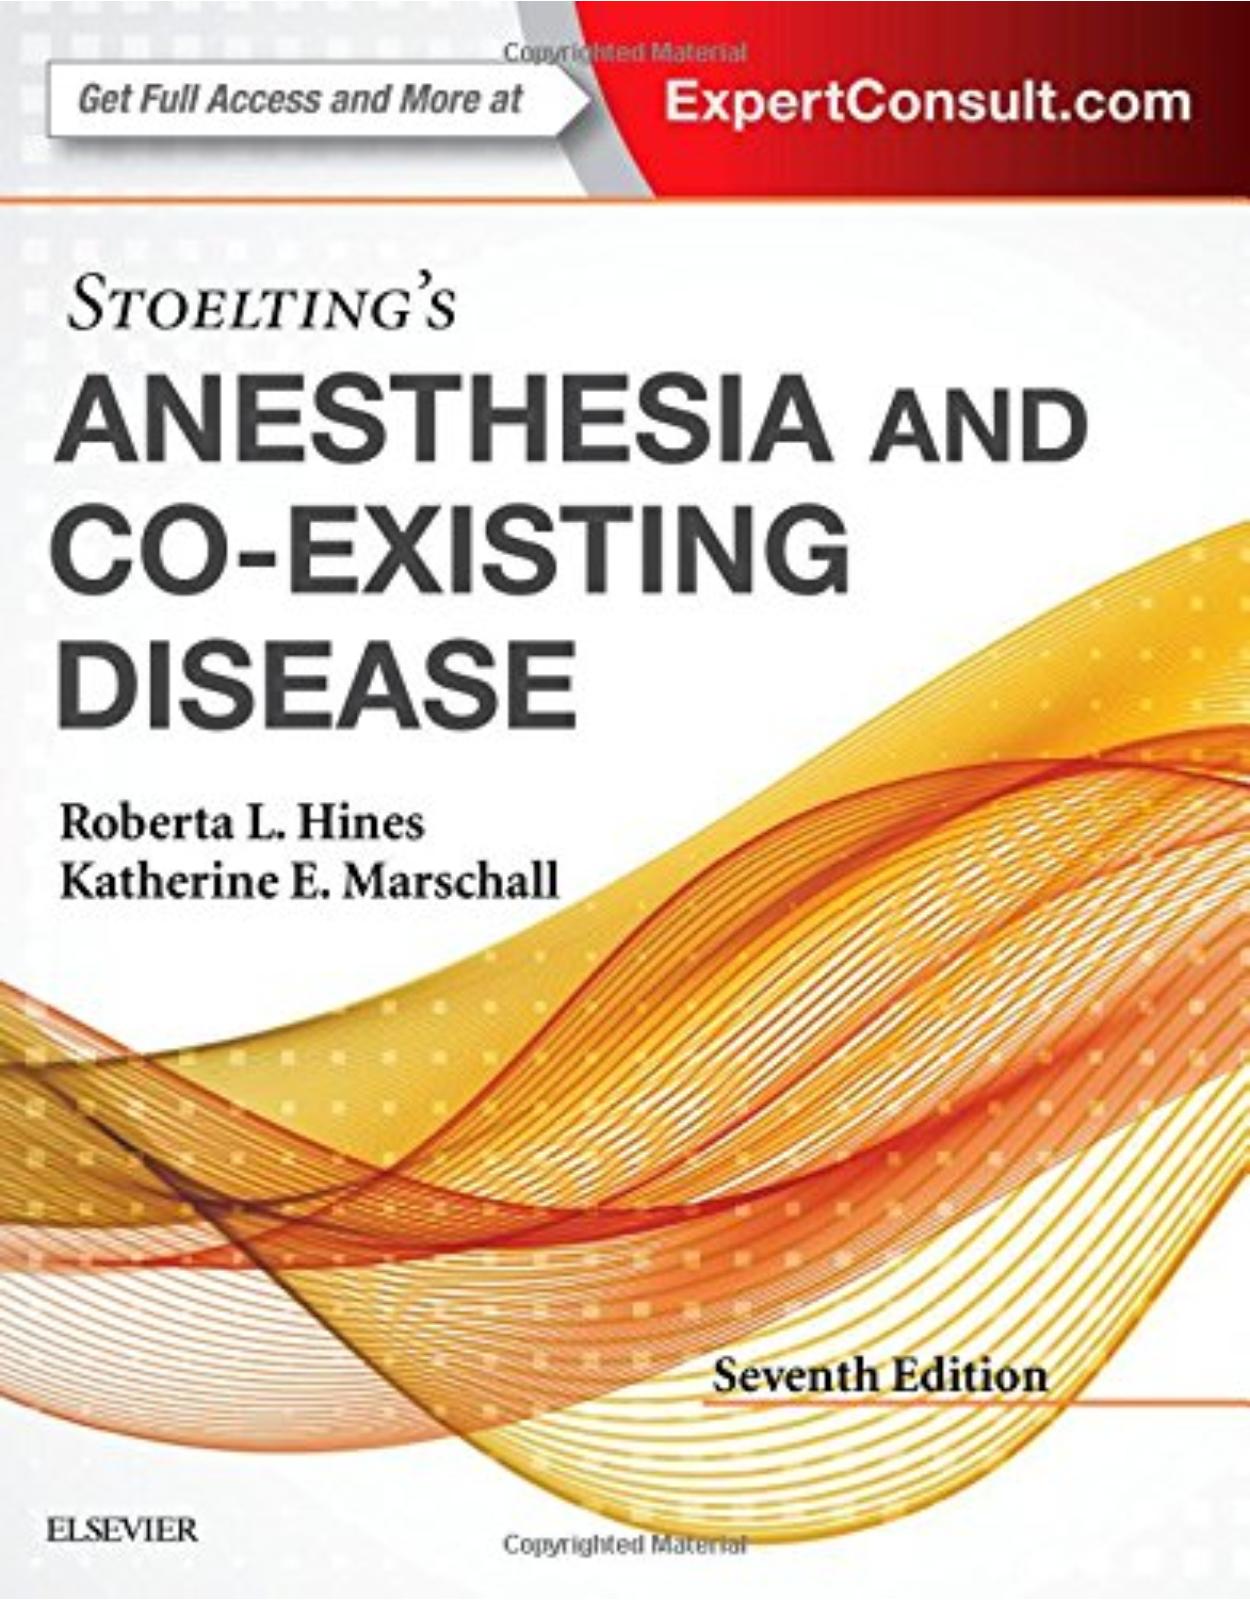 Stoelting s Anesthesia and Co-Existing Disease, 7e